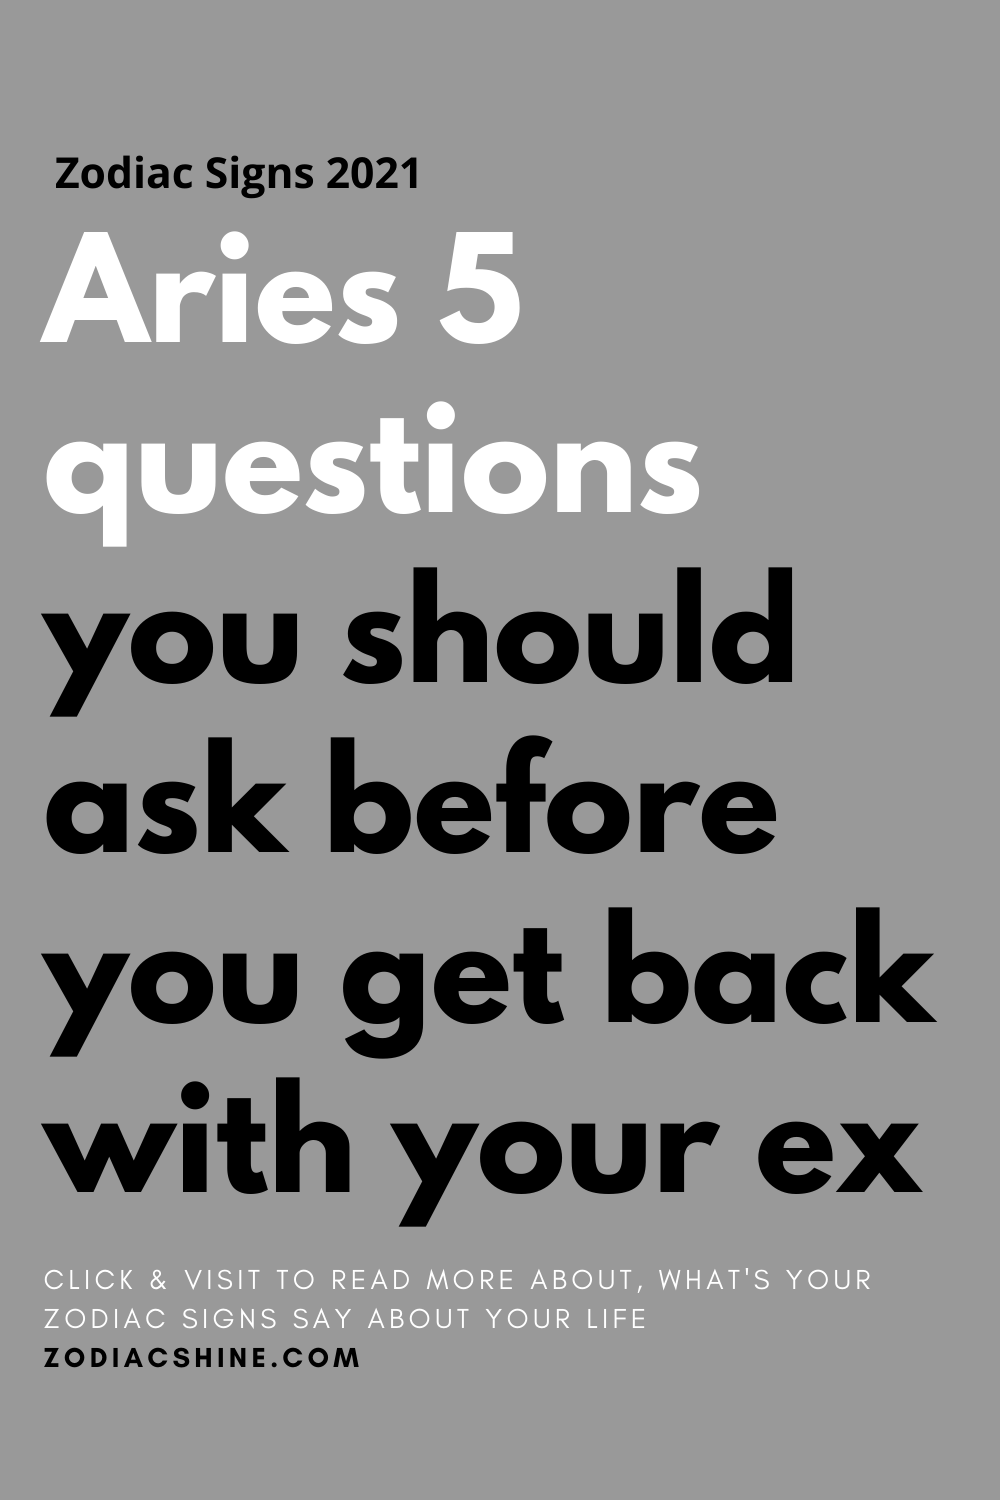 Aries 5 questions you should ask before you get back with your ex